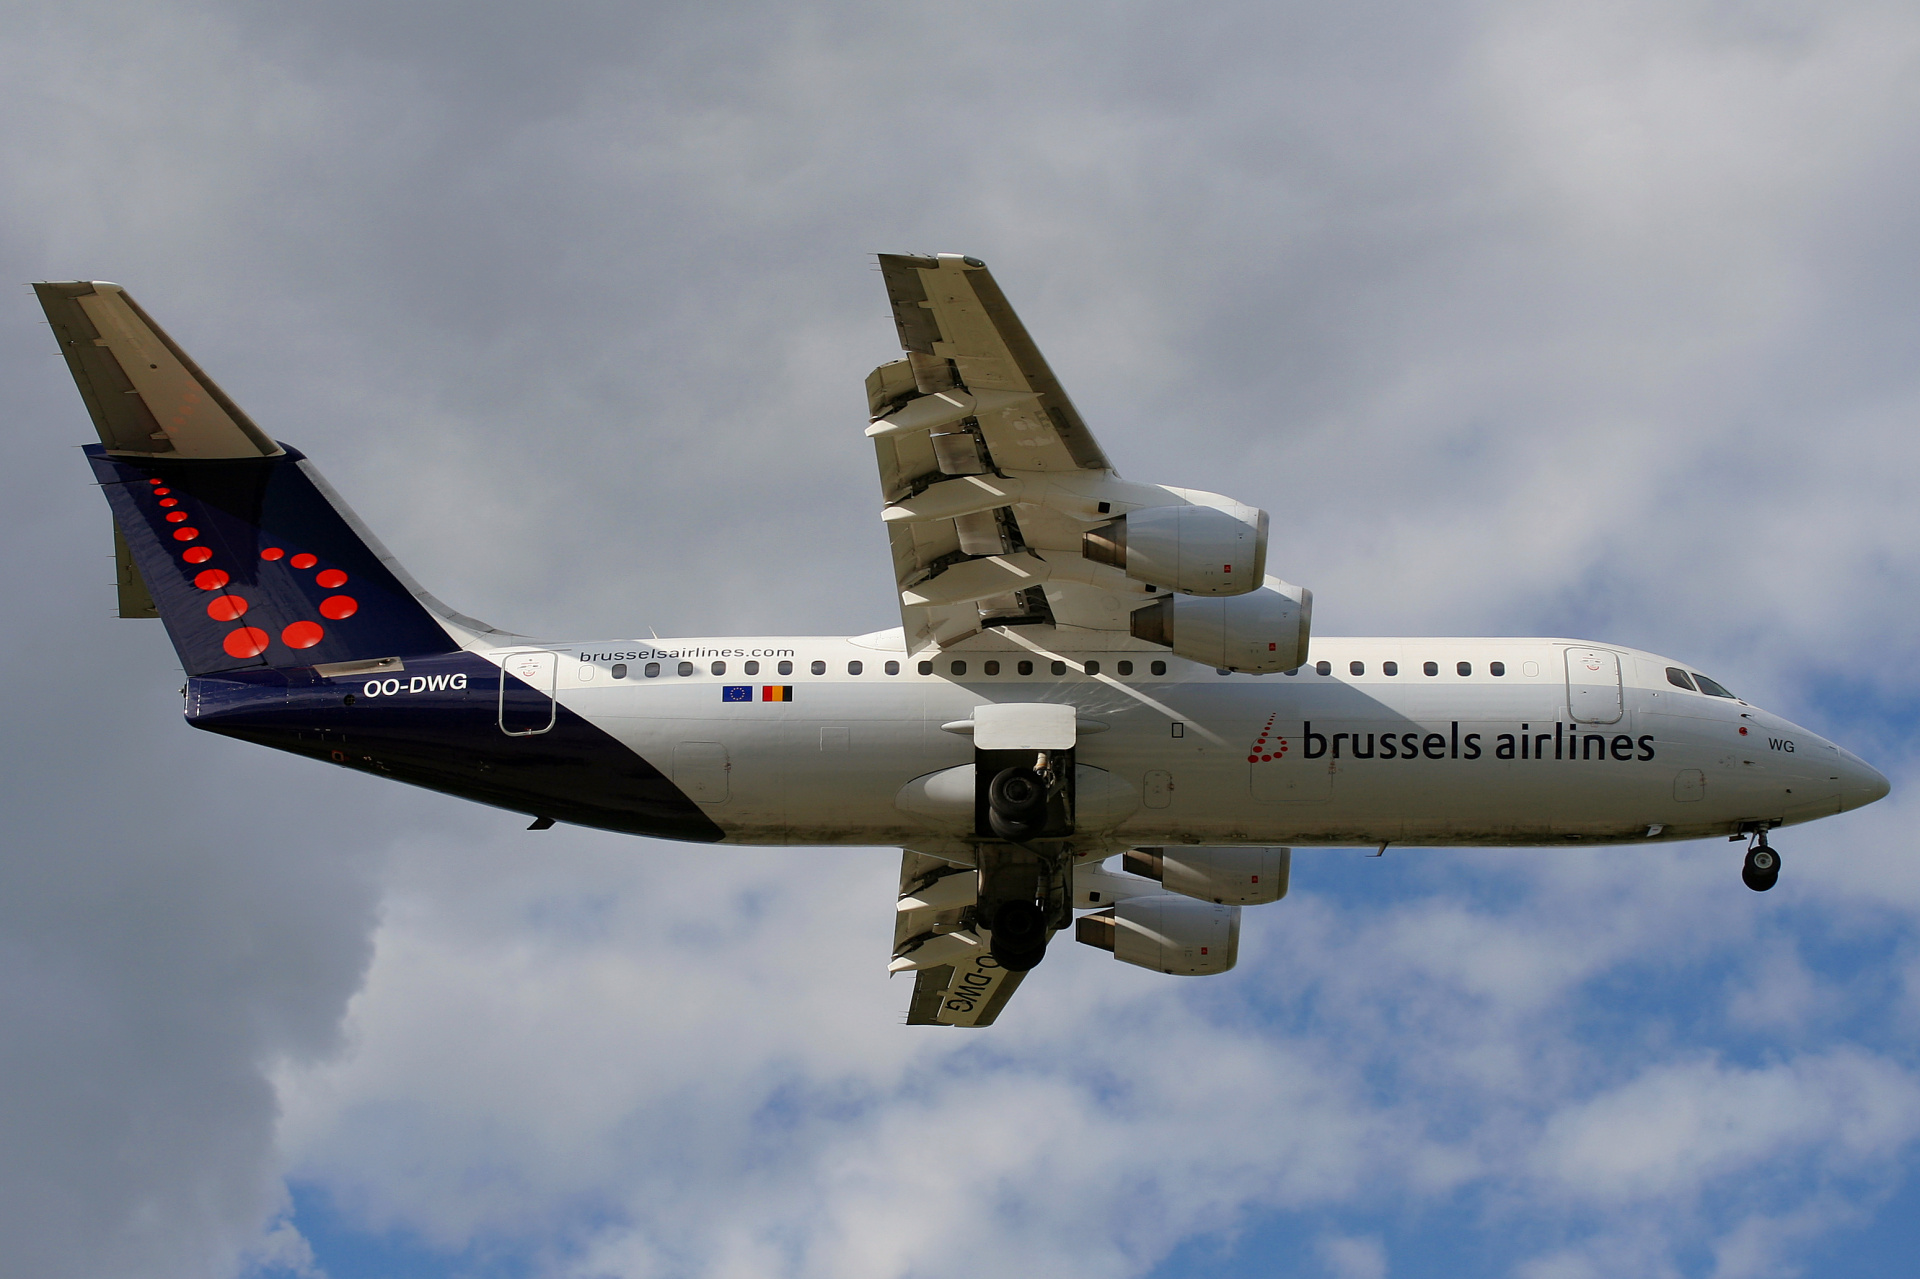 OO-DWG (Aircraft » EPWA Spotting » BAe 146 and revisions » Avro RJ100 » Brussels Airlines)